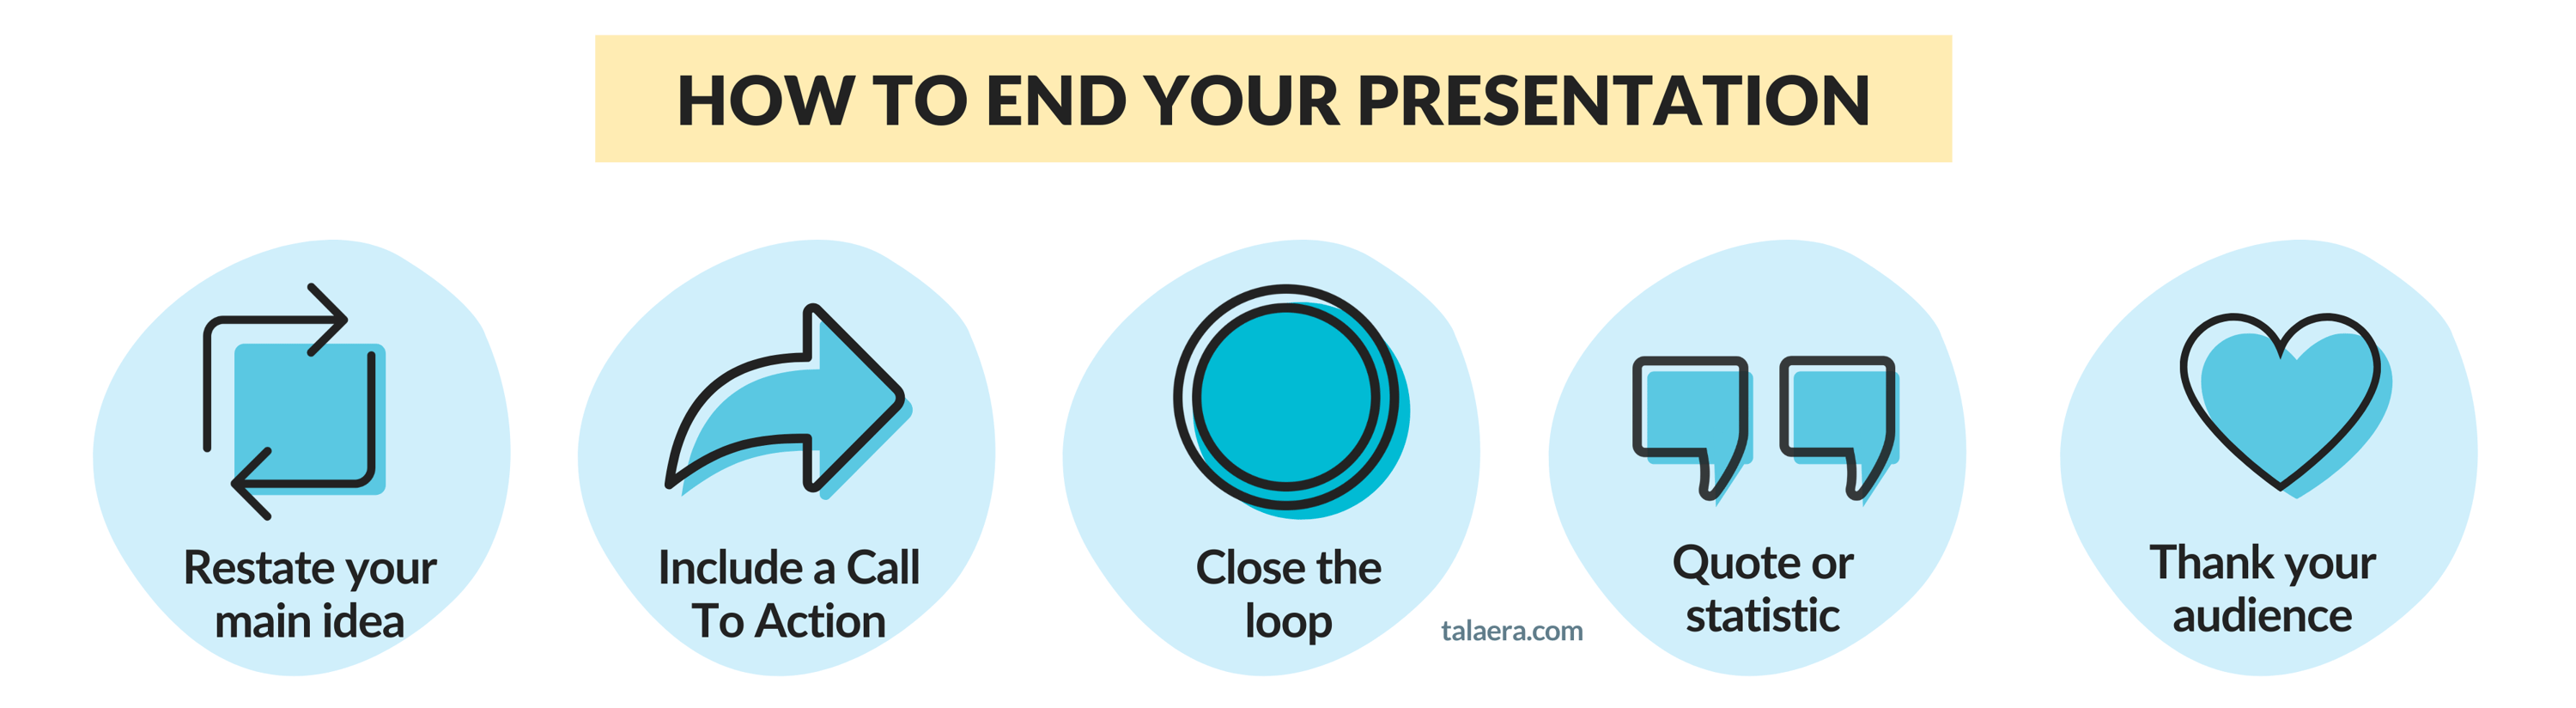 how best to end a presentation